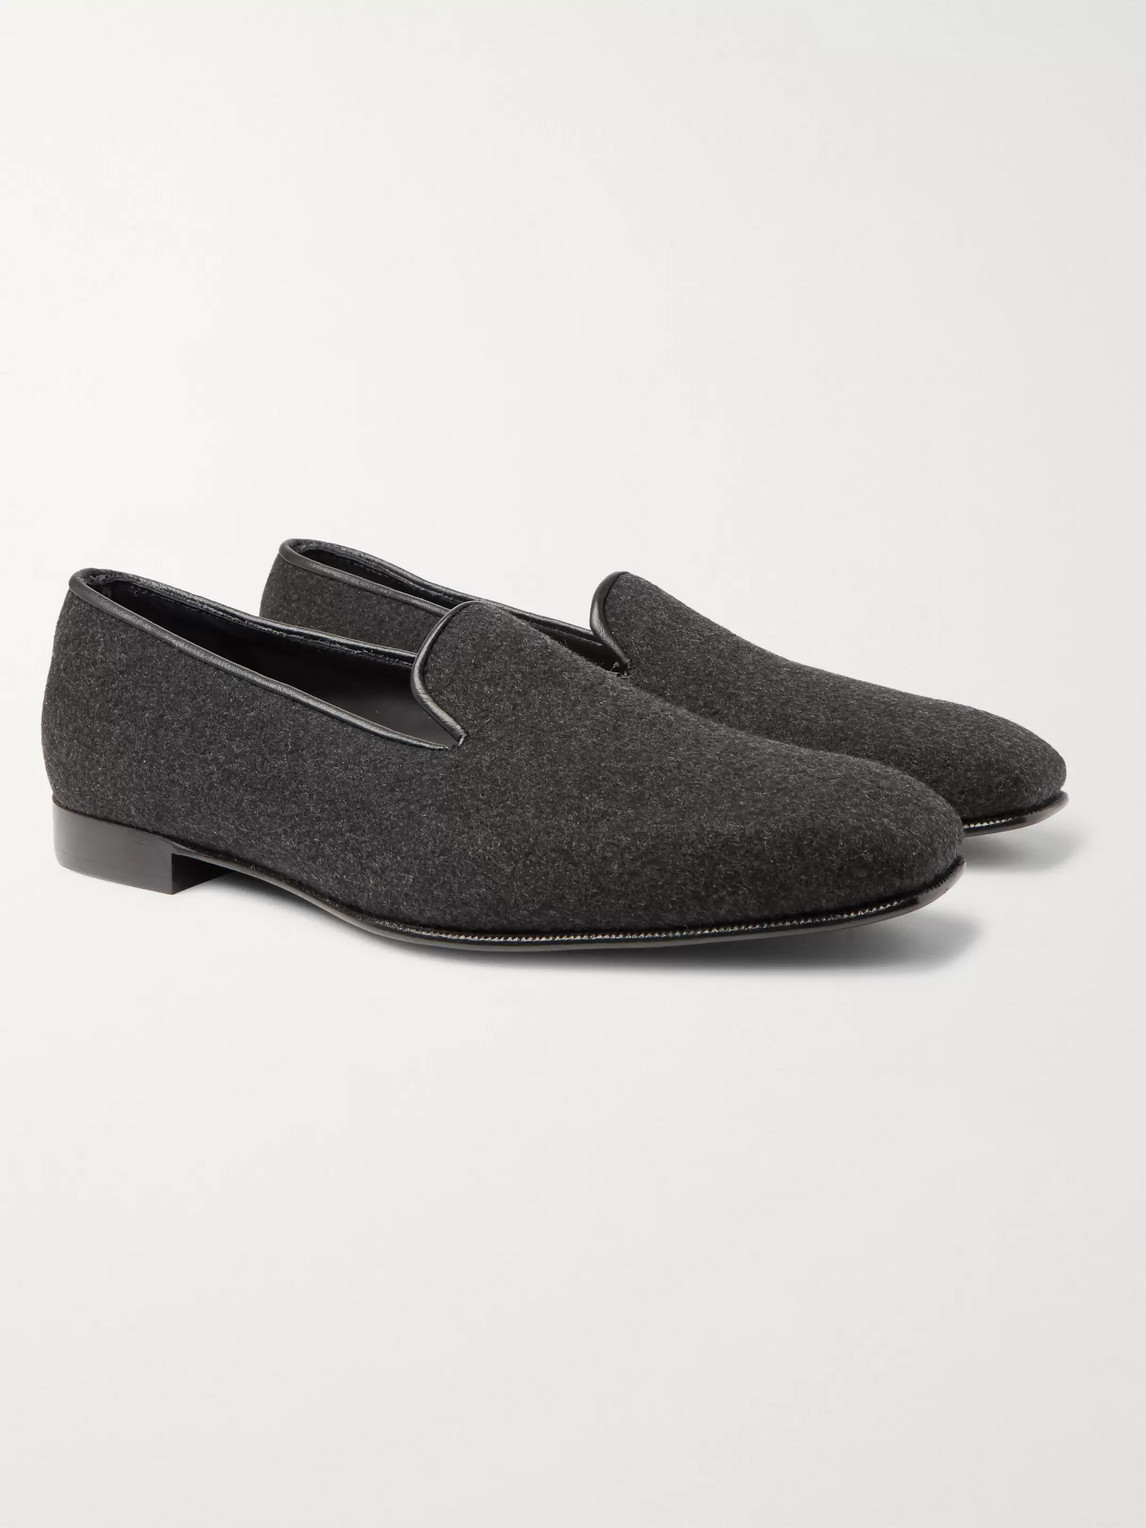 Anderson & Sheppard George Cleverley Leather-trimmed Cashmere Slippers In Gray